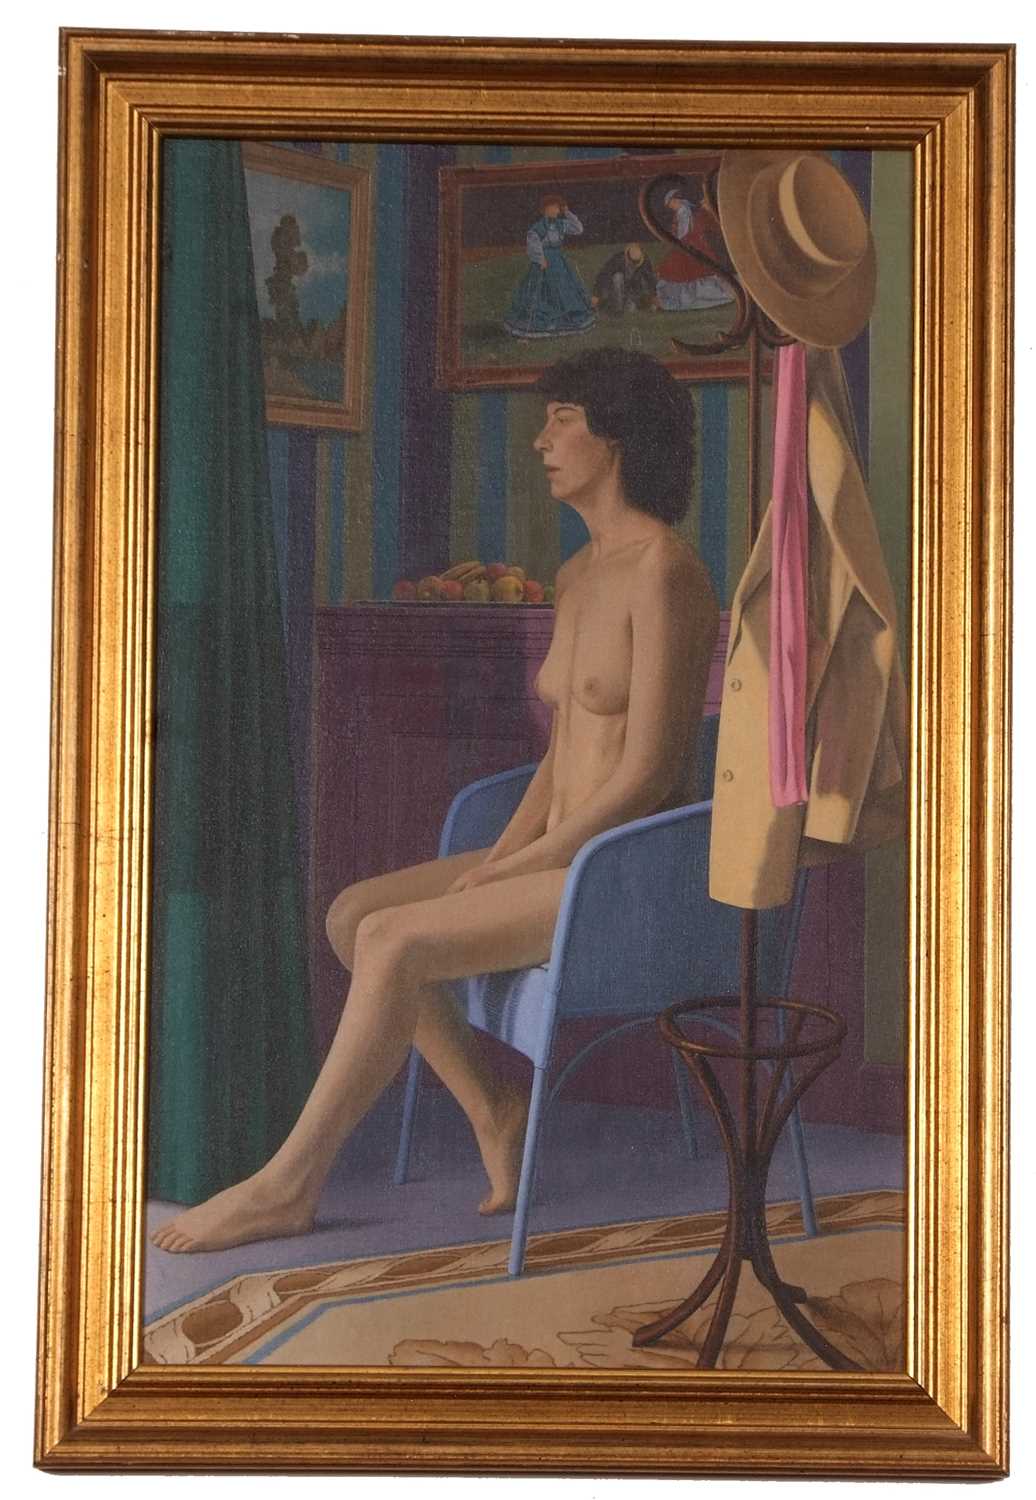 Steven Whitehead (British, 20th century), An interior scene with a seated nude female, oil on board,